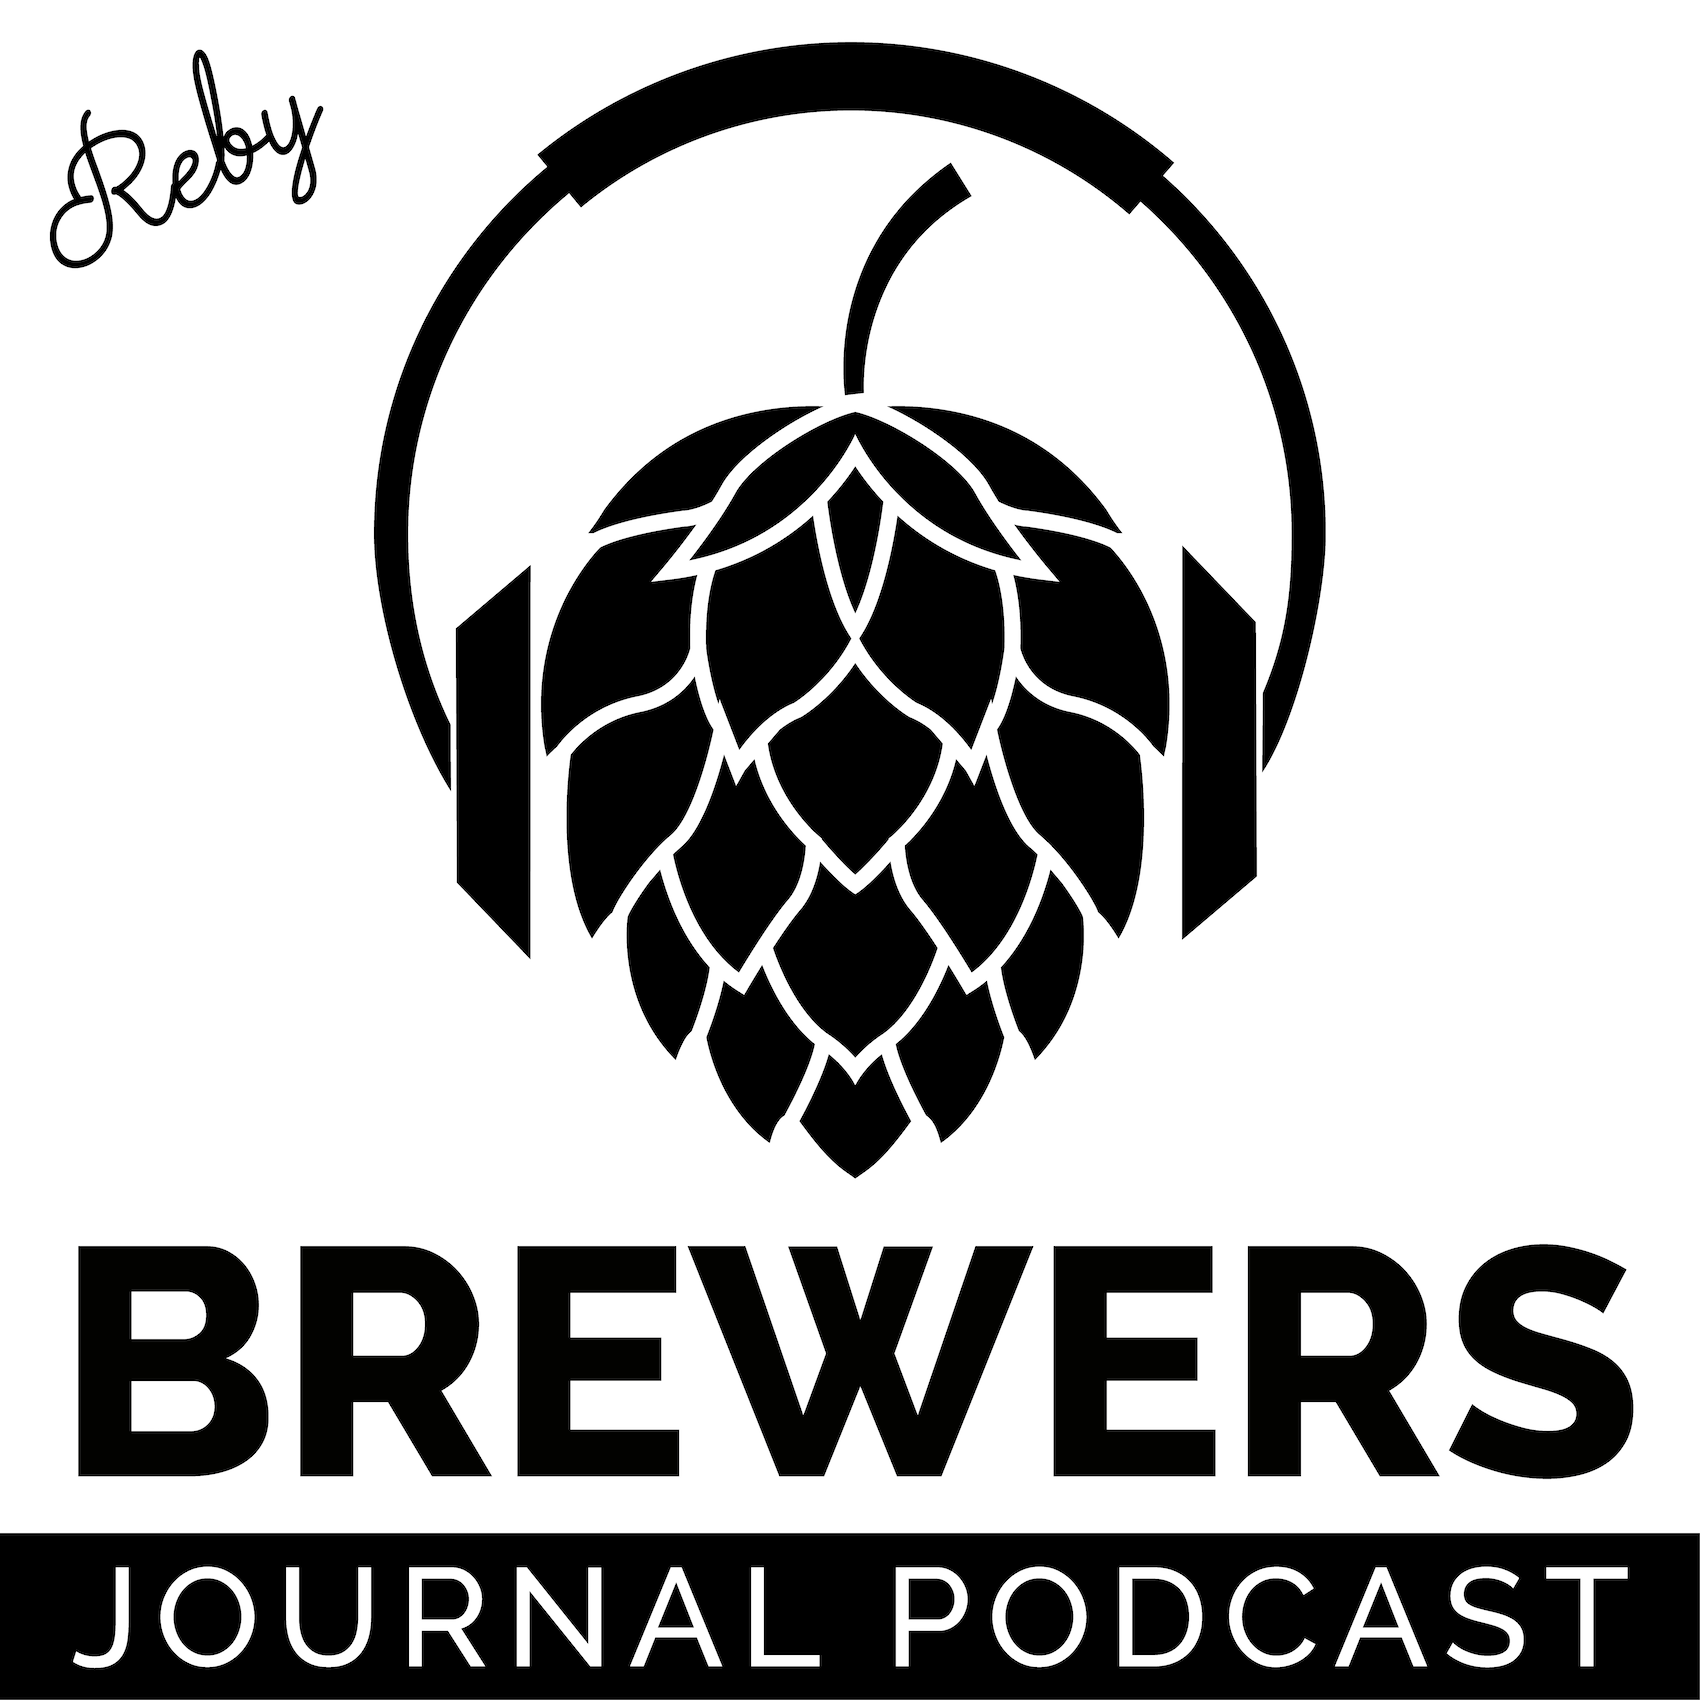 Brewers Journal Podcast